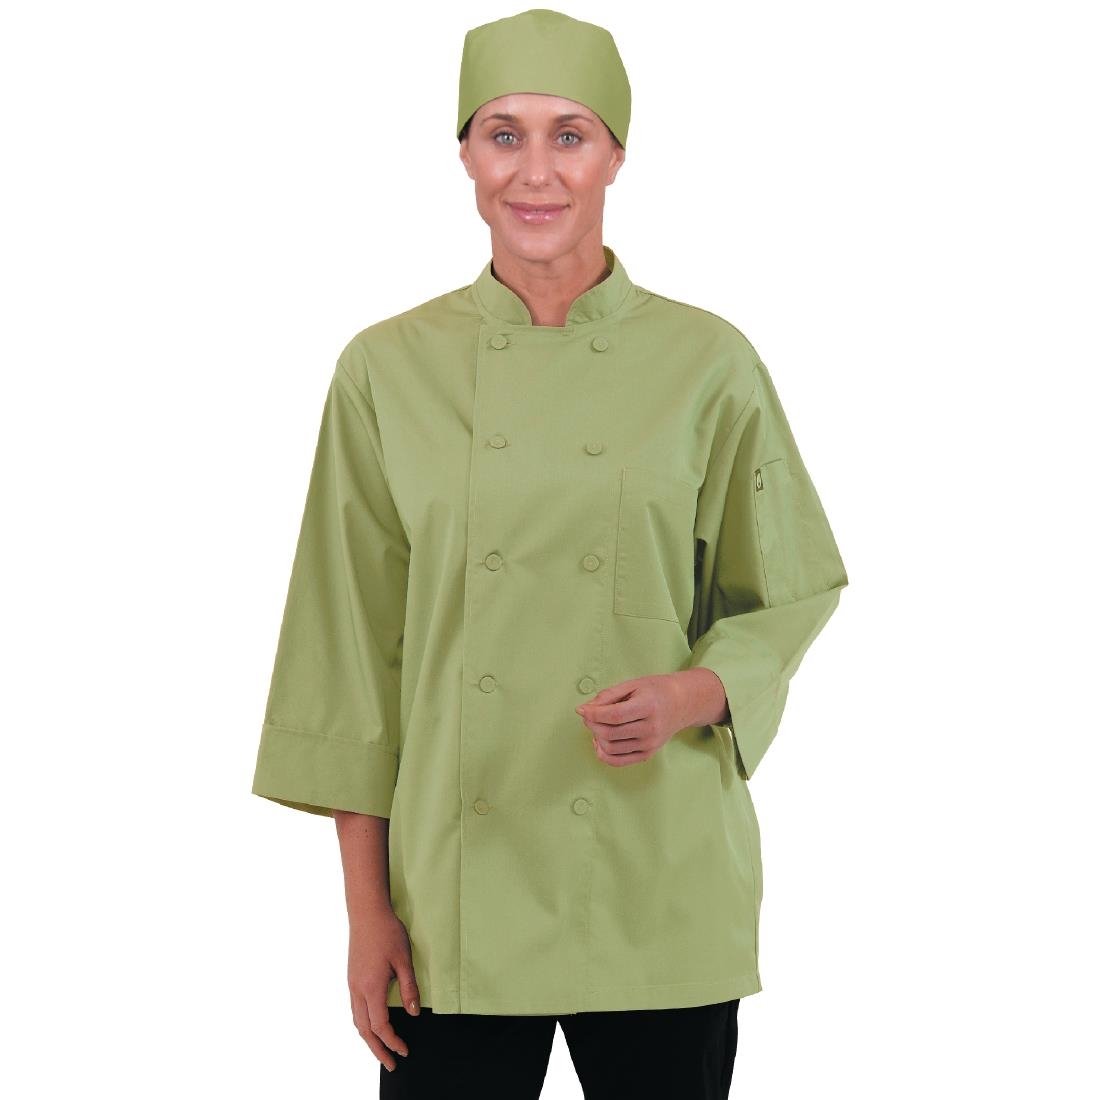 B107-XXL Chef Works Unisex Chefs Jacket Lime 2XL JD Catering Equipment Solutions Ltd